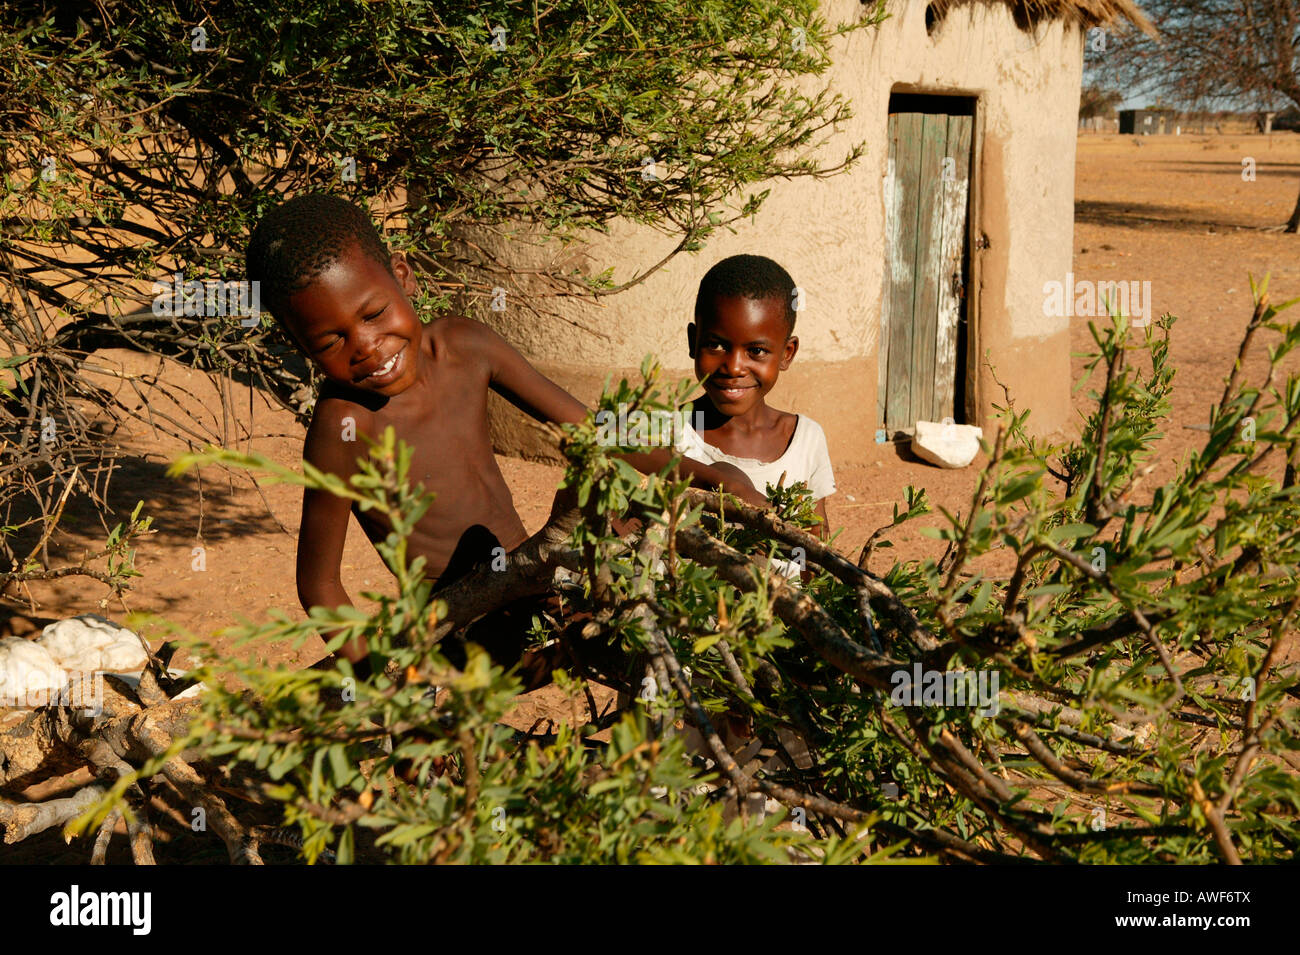 Two boys playing with a branch, Cattlepost Bothatogo, Botswana, Africa Stock Photo